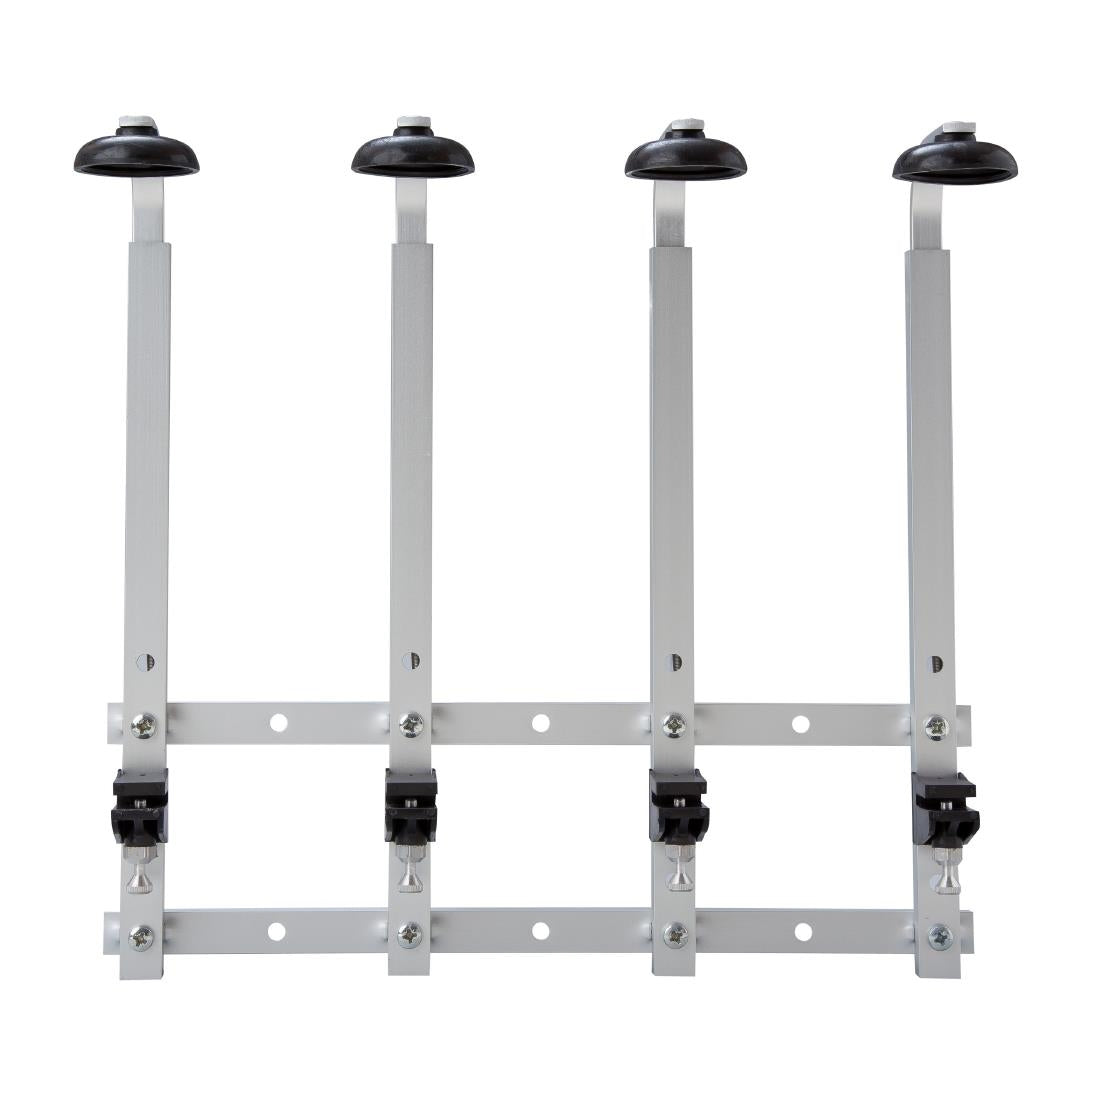 CZ368 Beaumont Four Bottle Wall Rack Bagged JD Catering Equipment Solutions Ltd